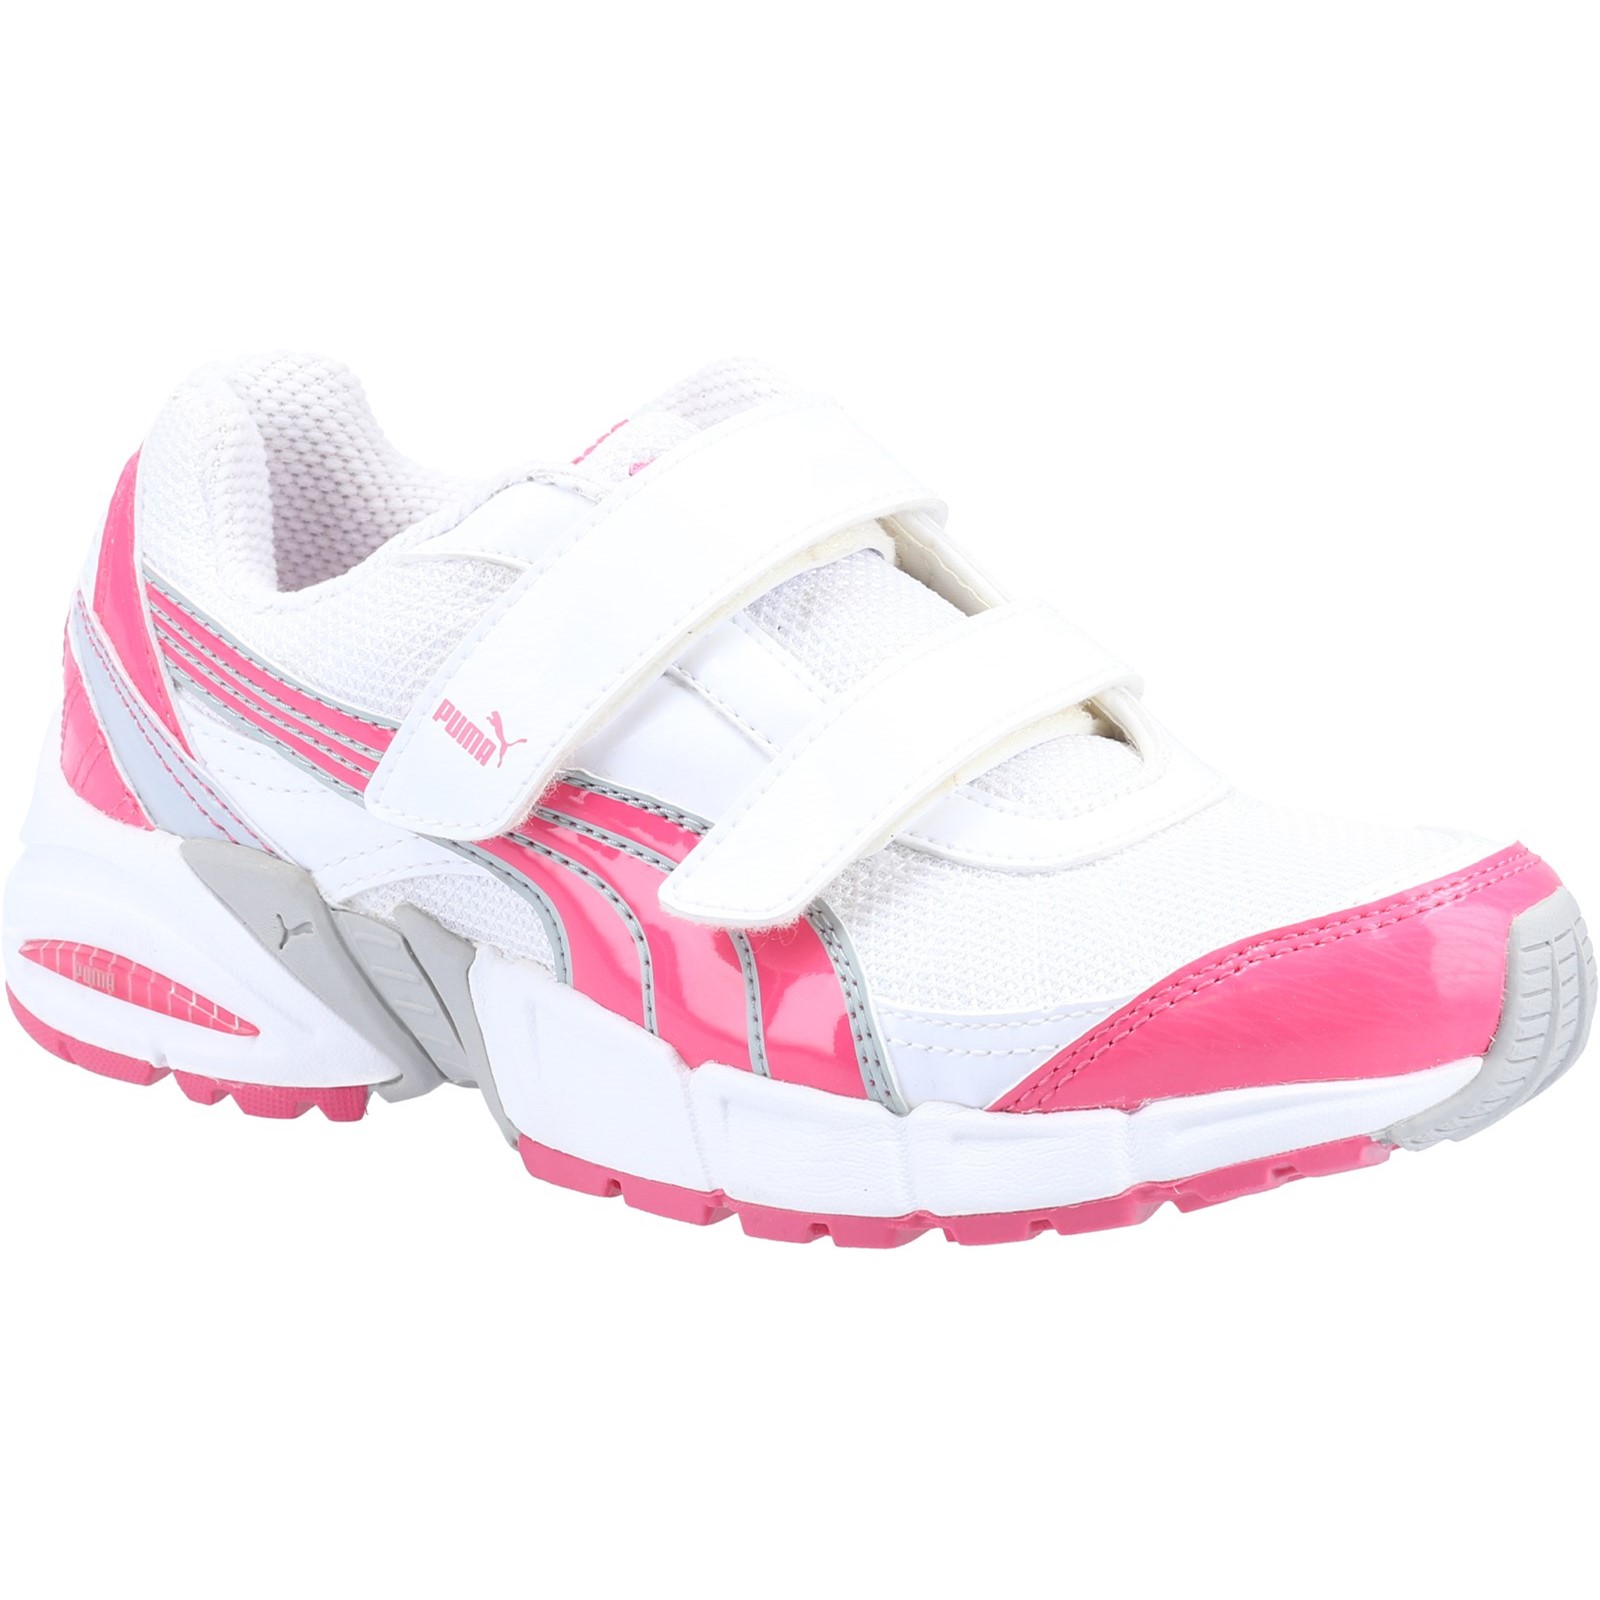 Cell Exert Childrens Velcro Trainers